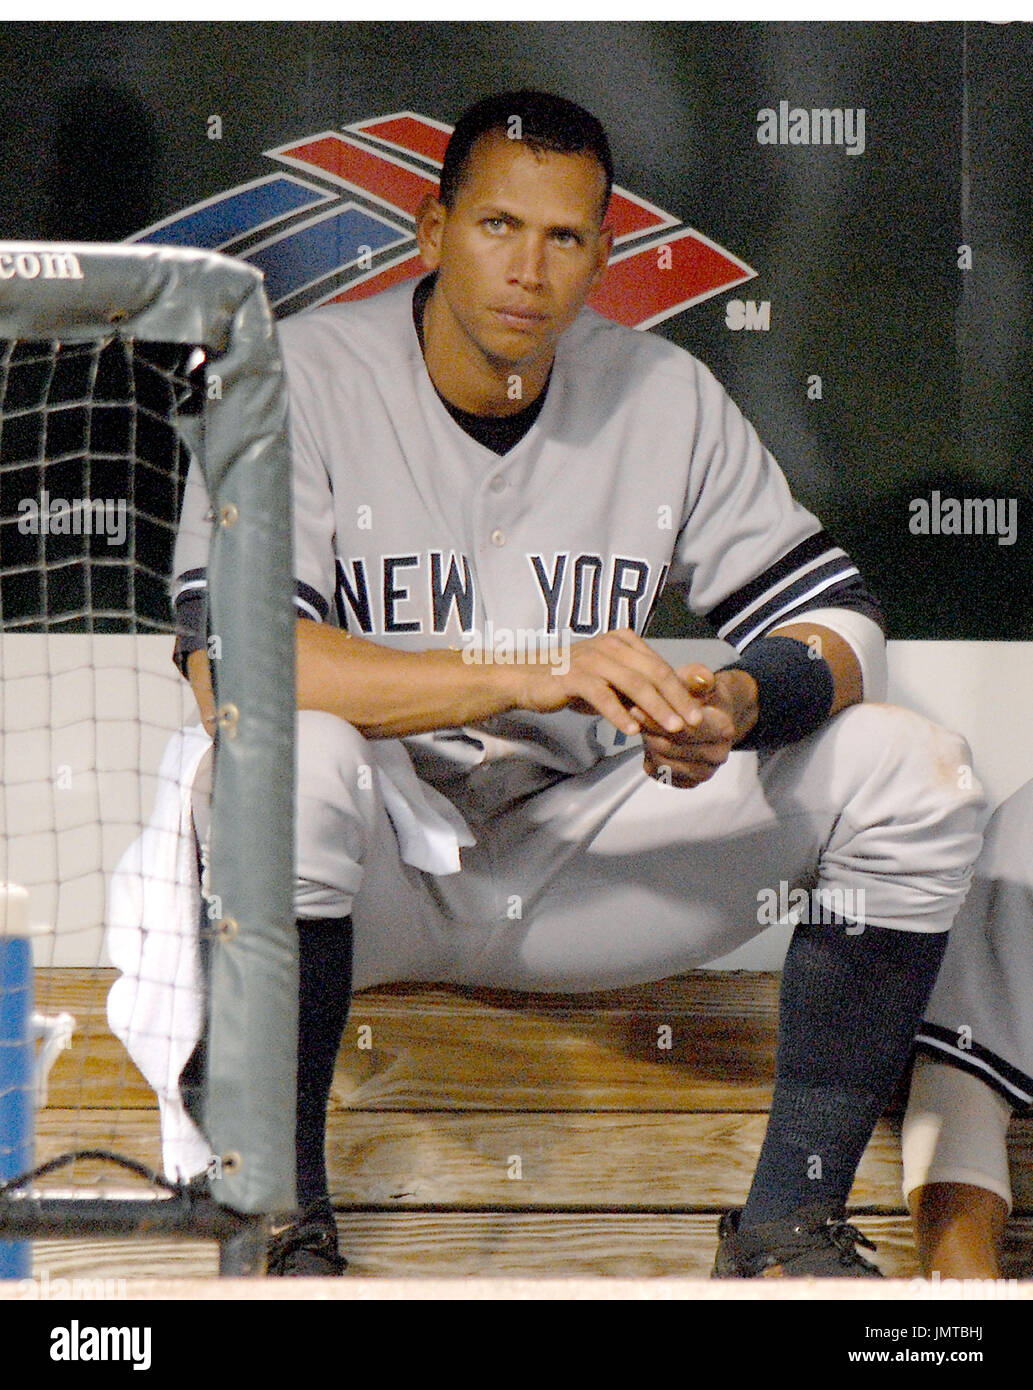 Baltimore, MD - July 27, 2007 -- New York Yankee third baseman Alex  Rodriguez watches from the dugout as the Yankees bat in the second inning  against the Baltimore Orioles at Oriole